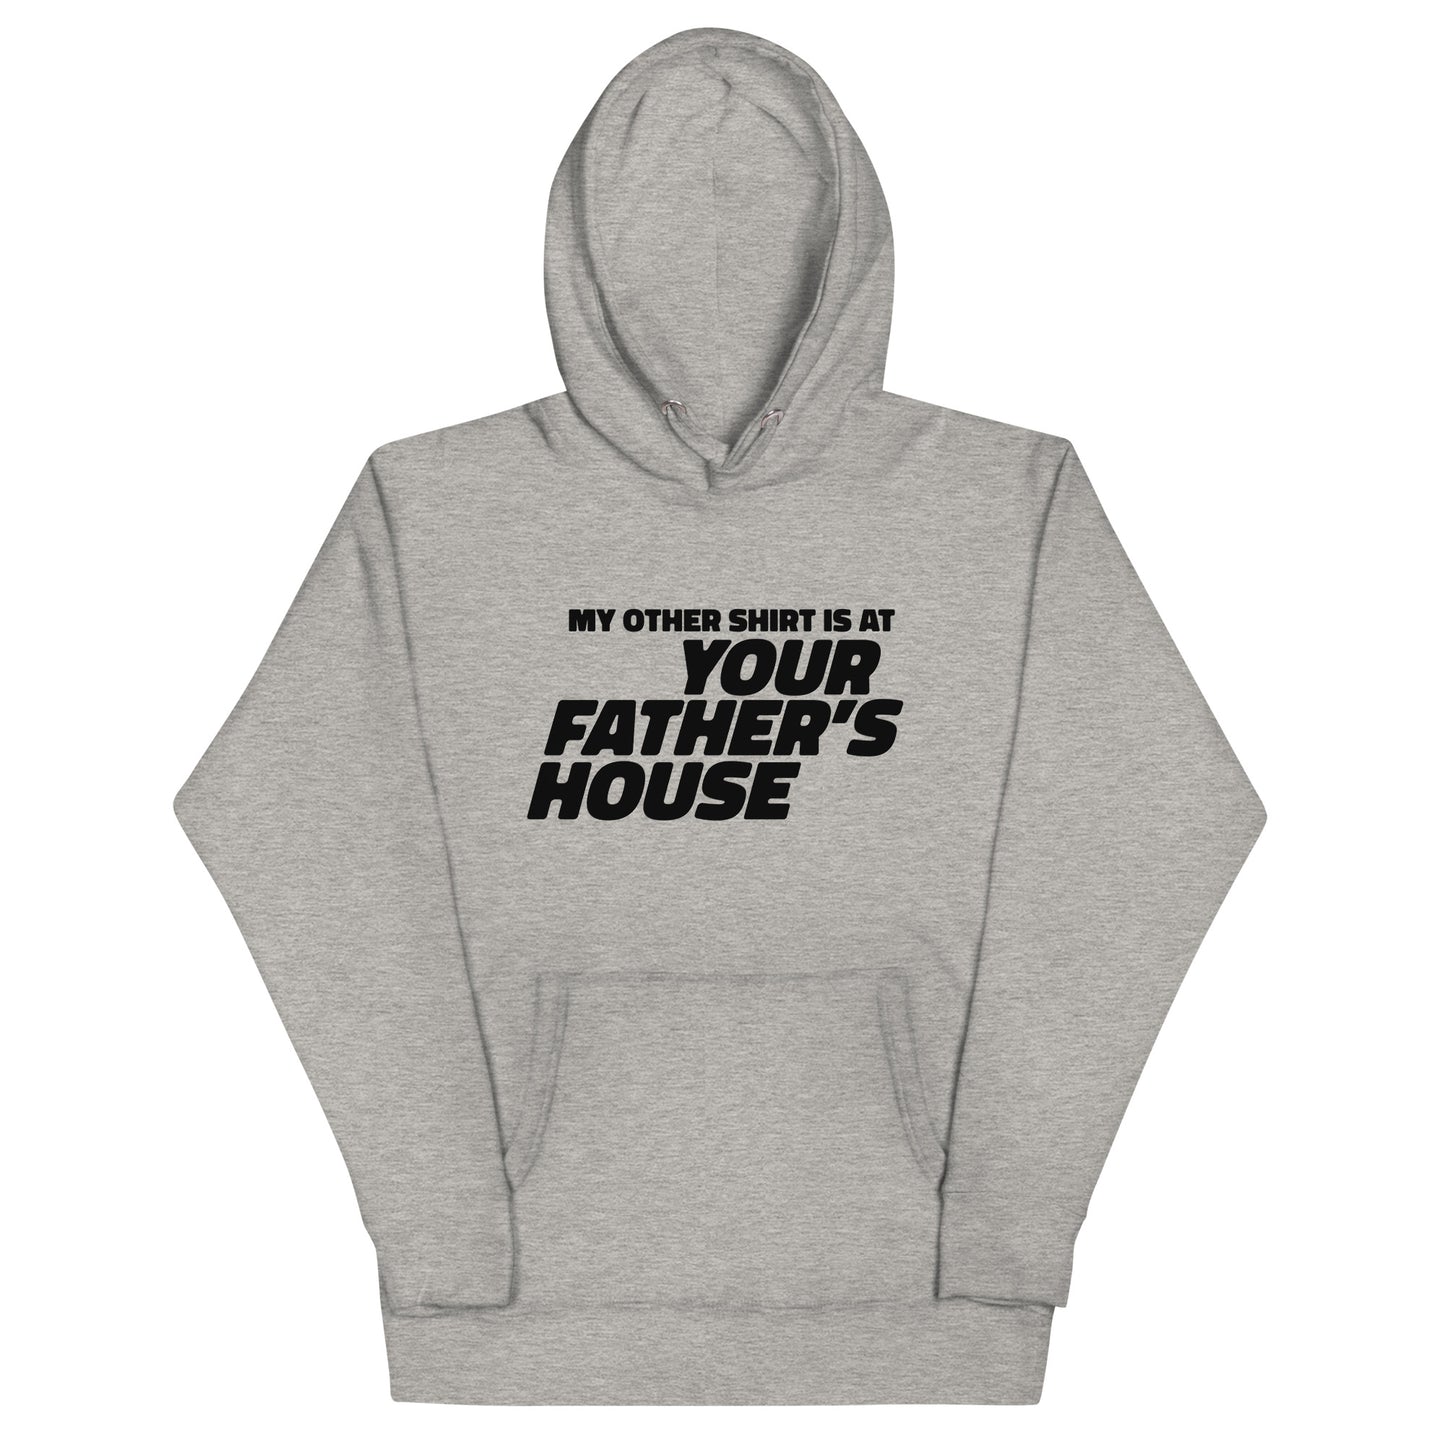 My Other Shirt is at Your Father's House Unisex Hoodie